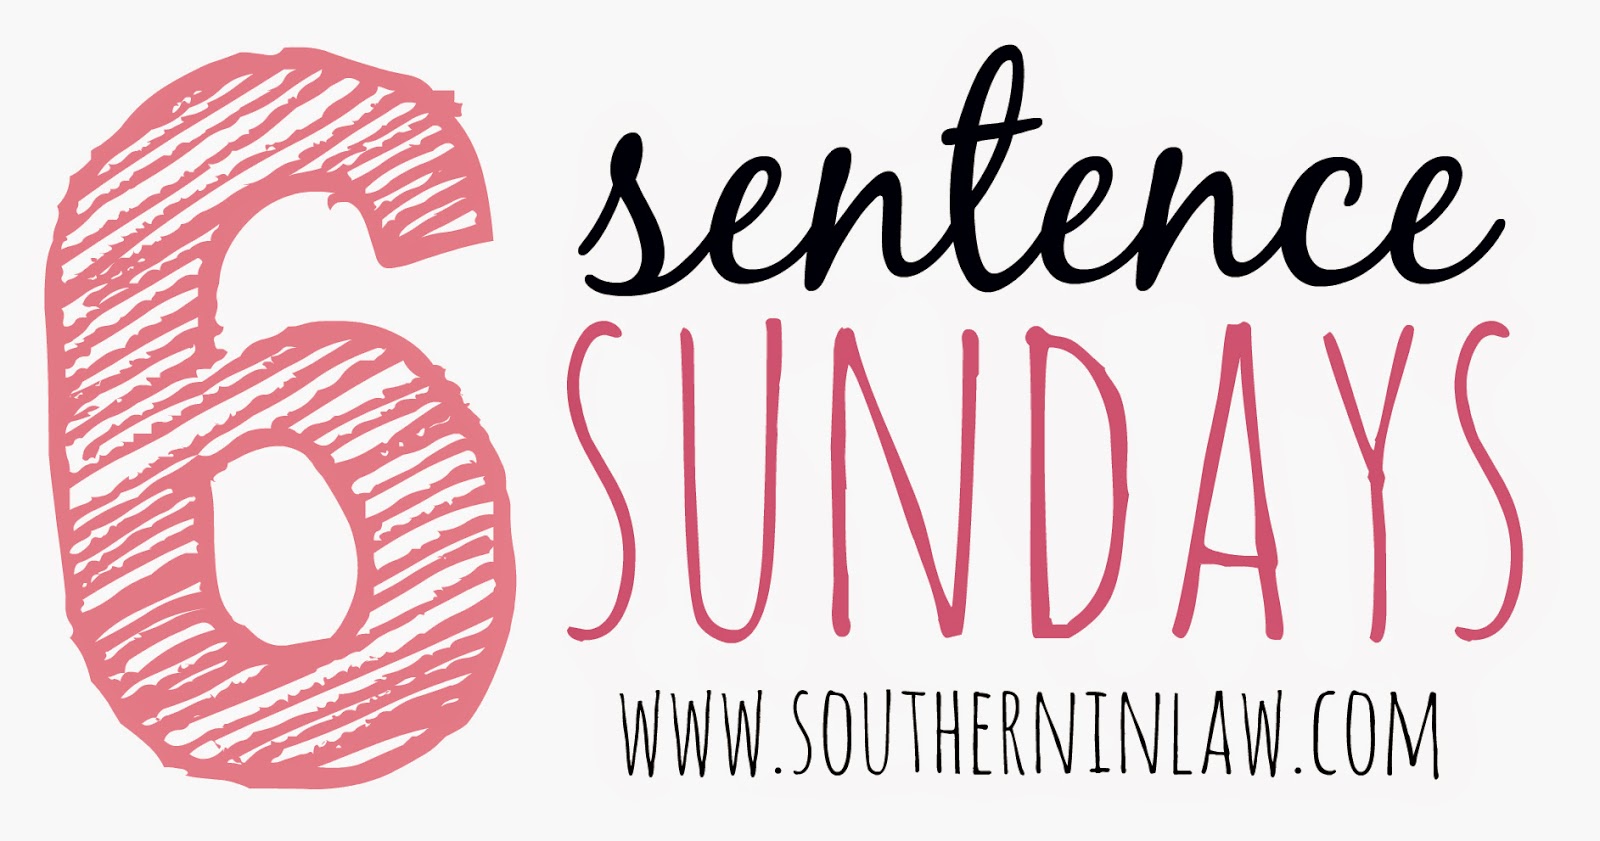 6 Sentence Sundays on Southern In-Law